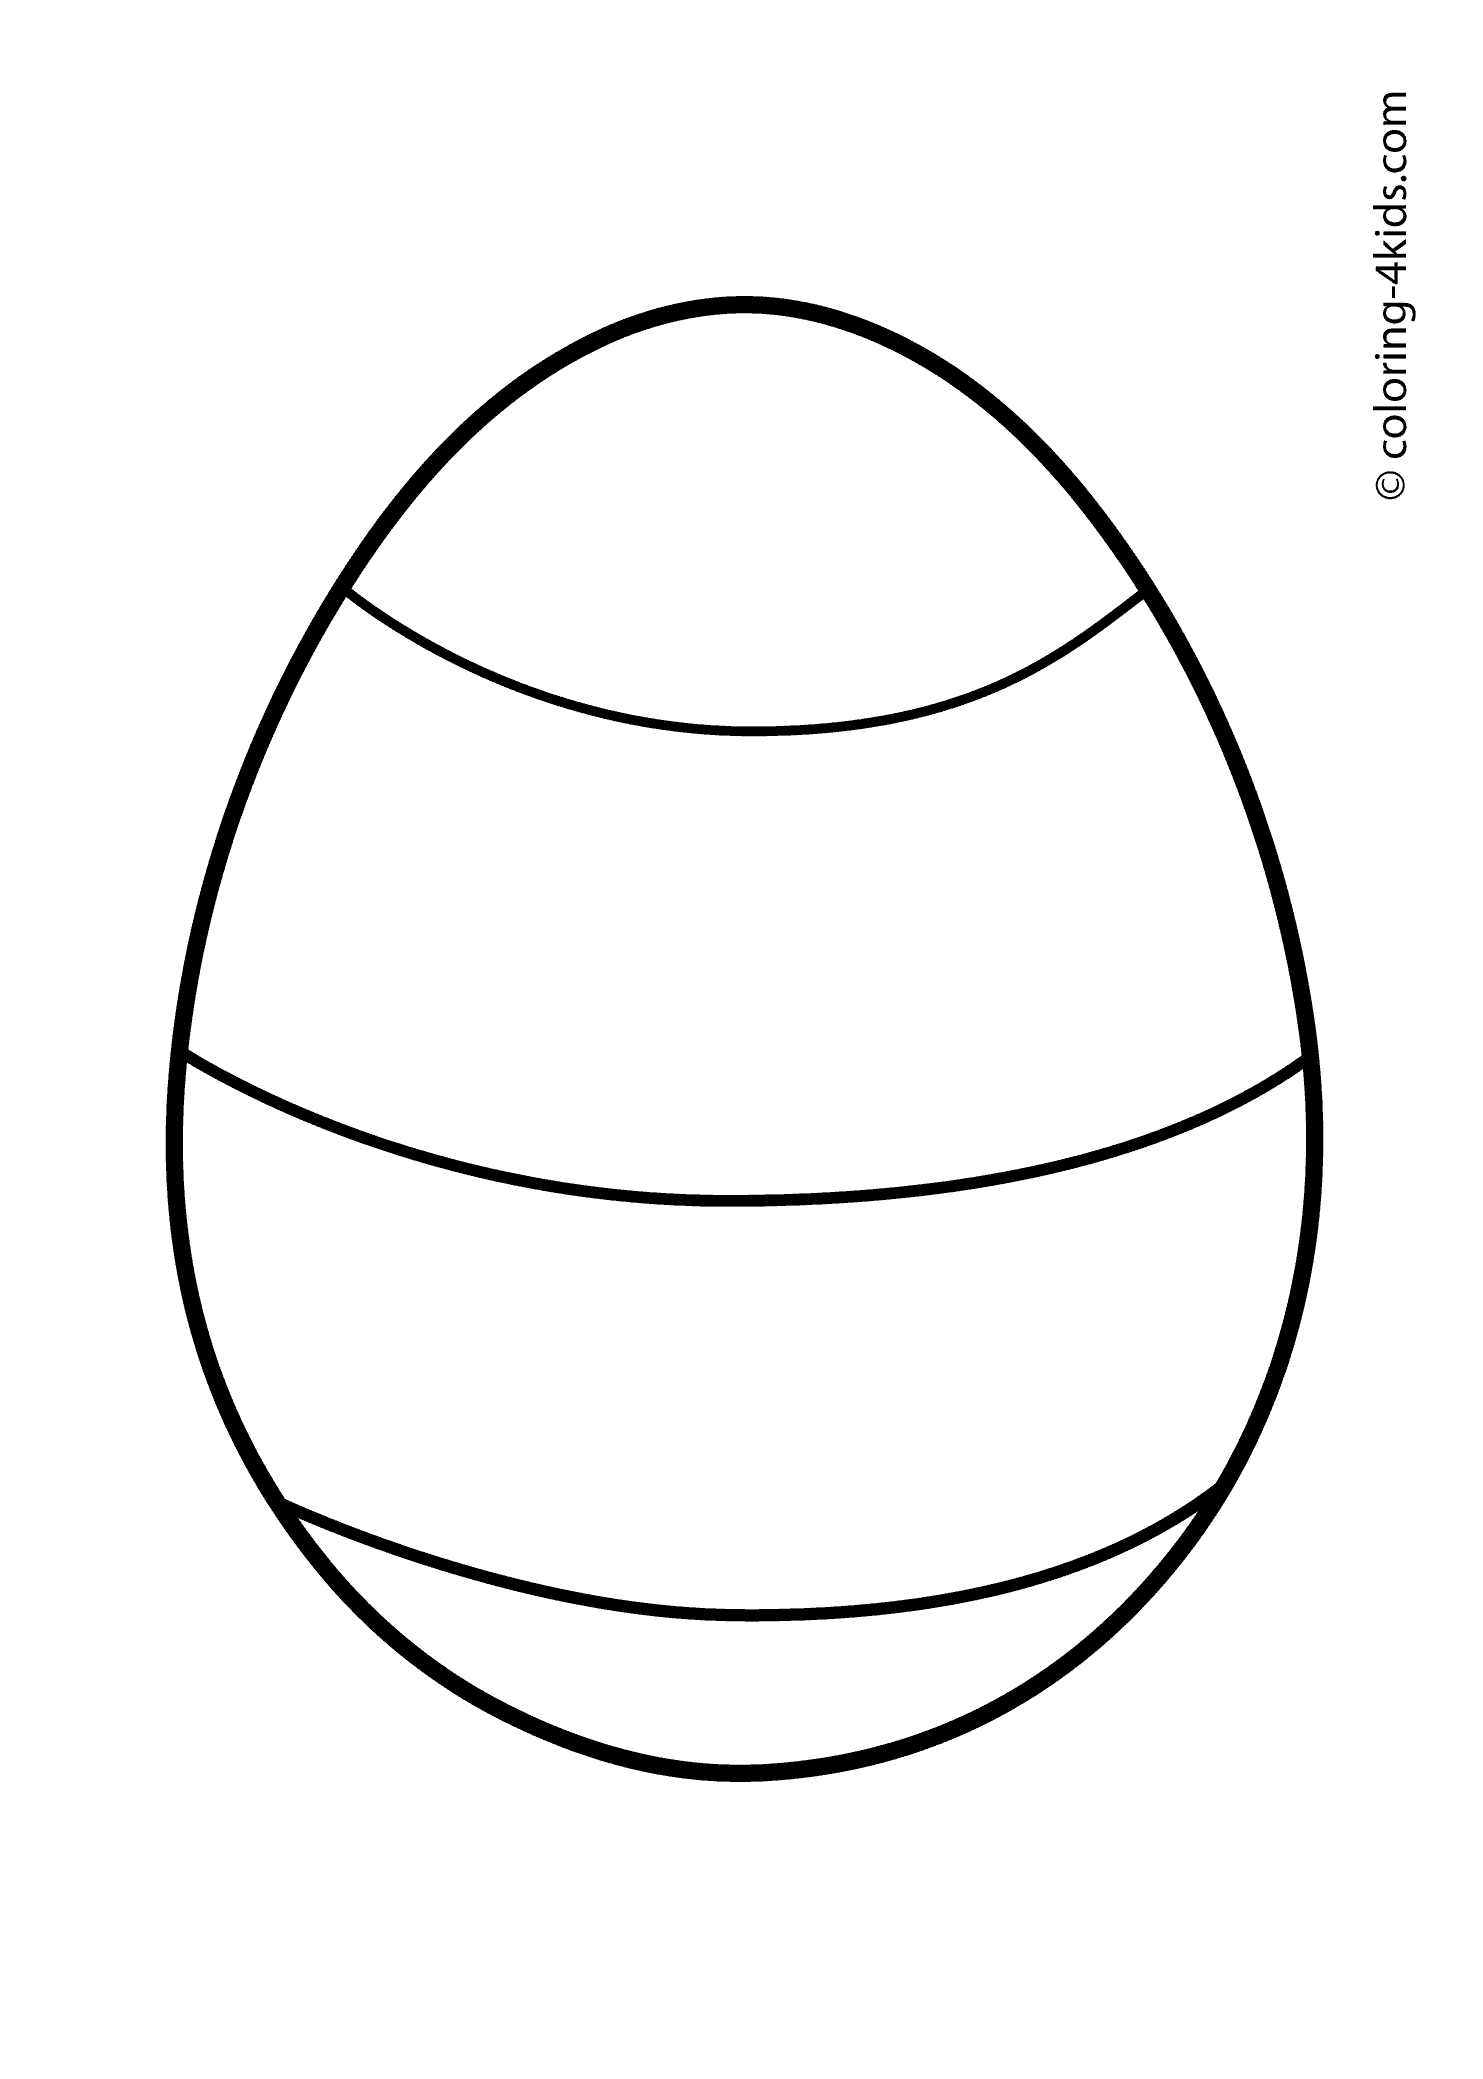 Easter Egg Coloring Pages Blank : Blank Easter Egg Template Spots